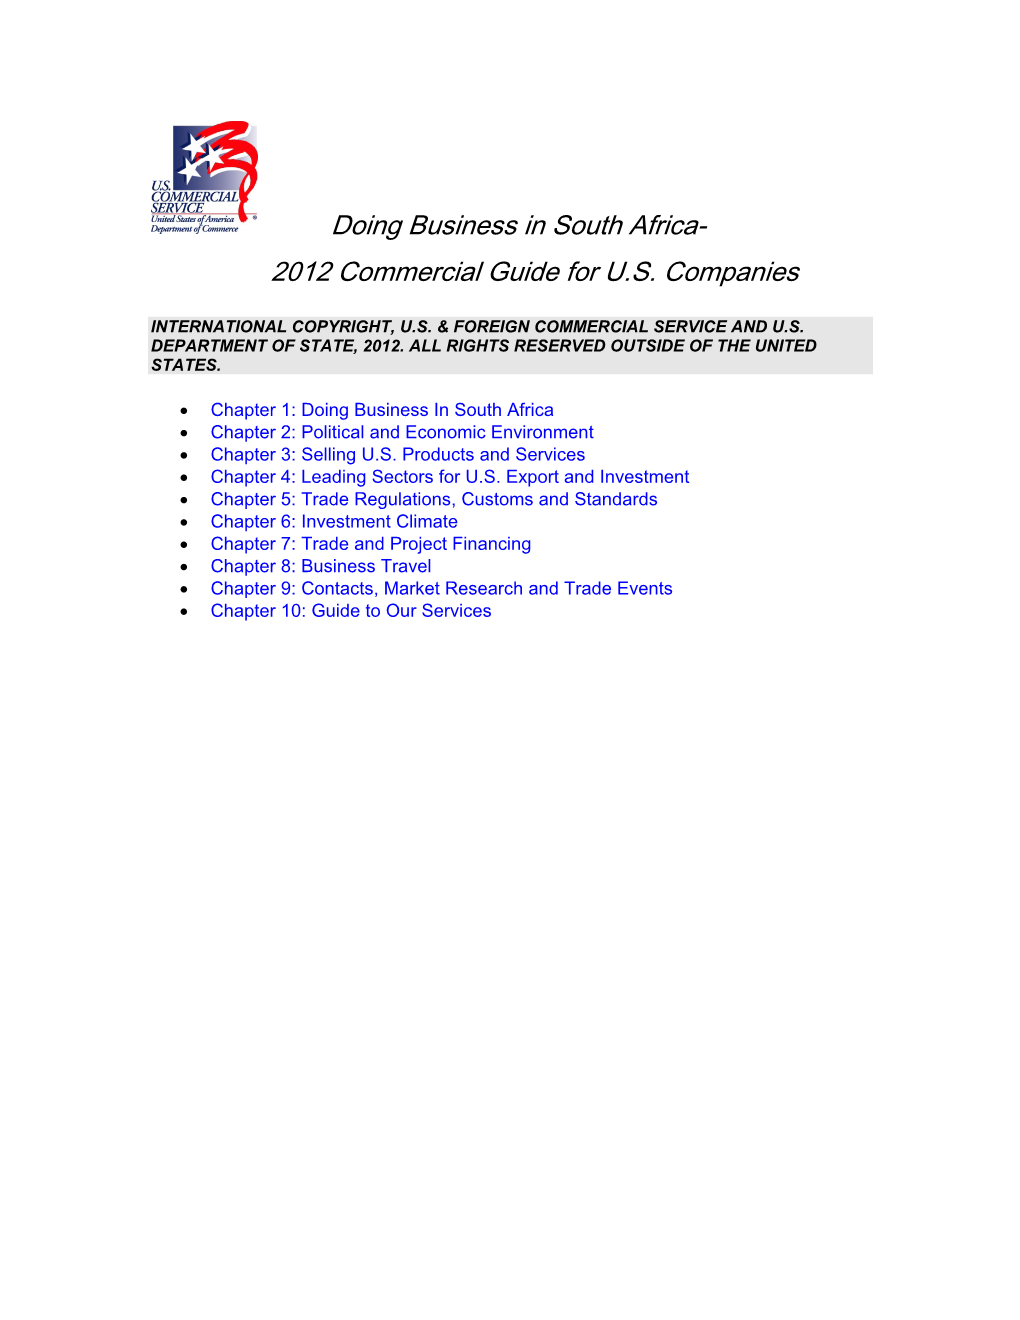 Doing Business in South Africa- 2012 Commercial Guide for US Companies